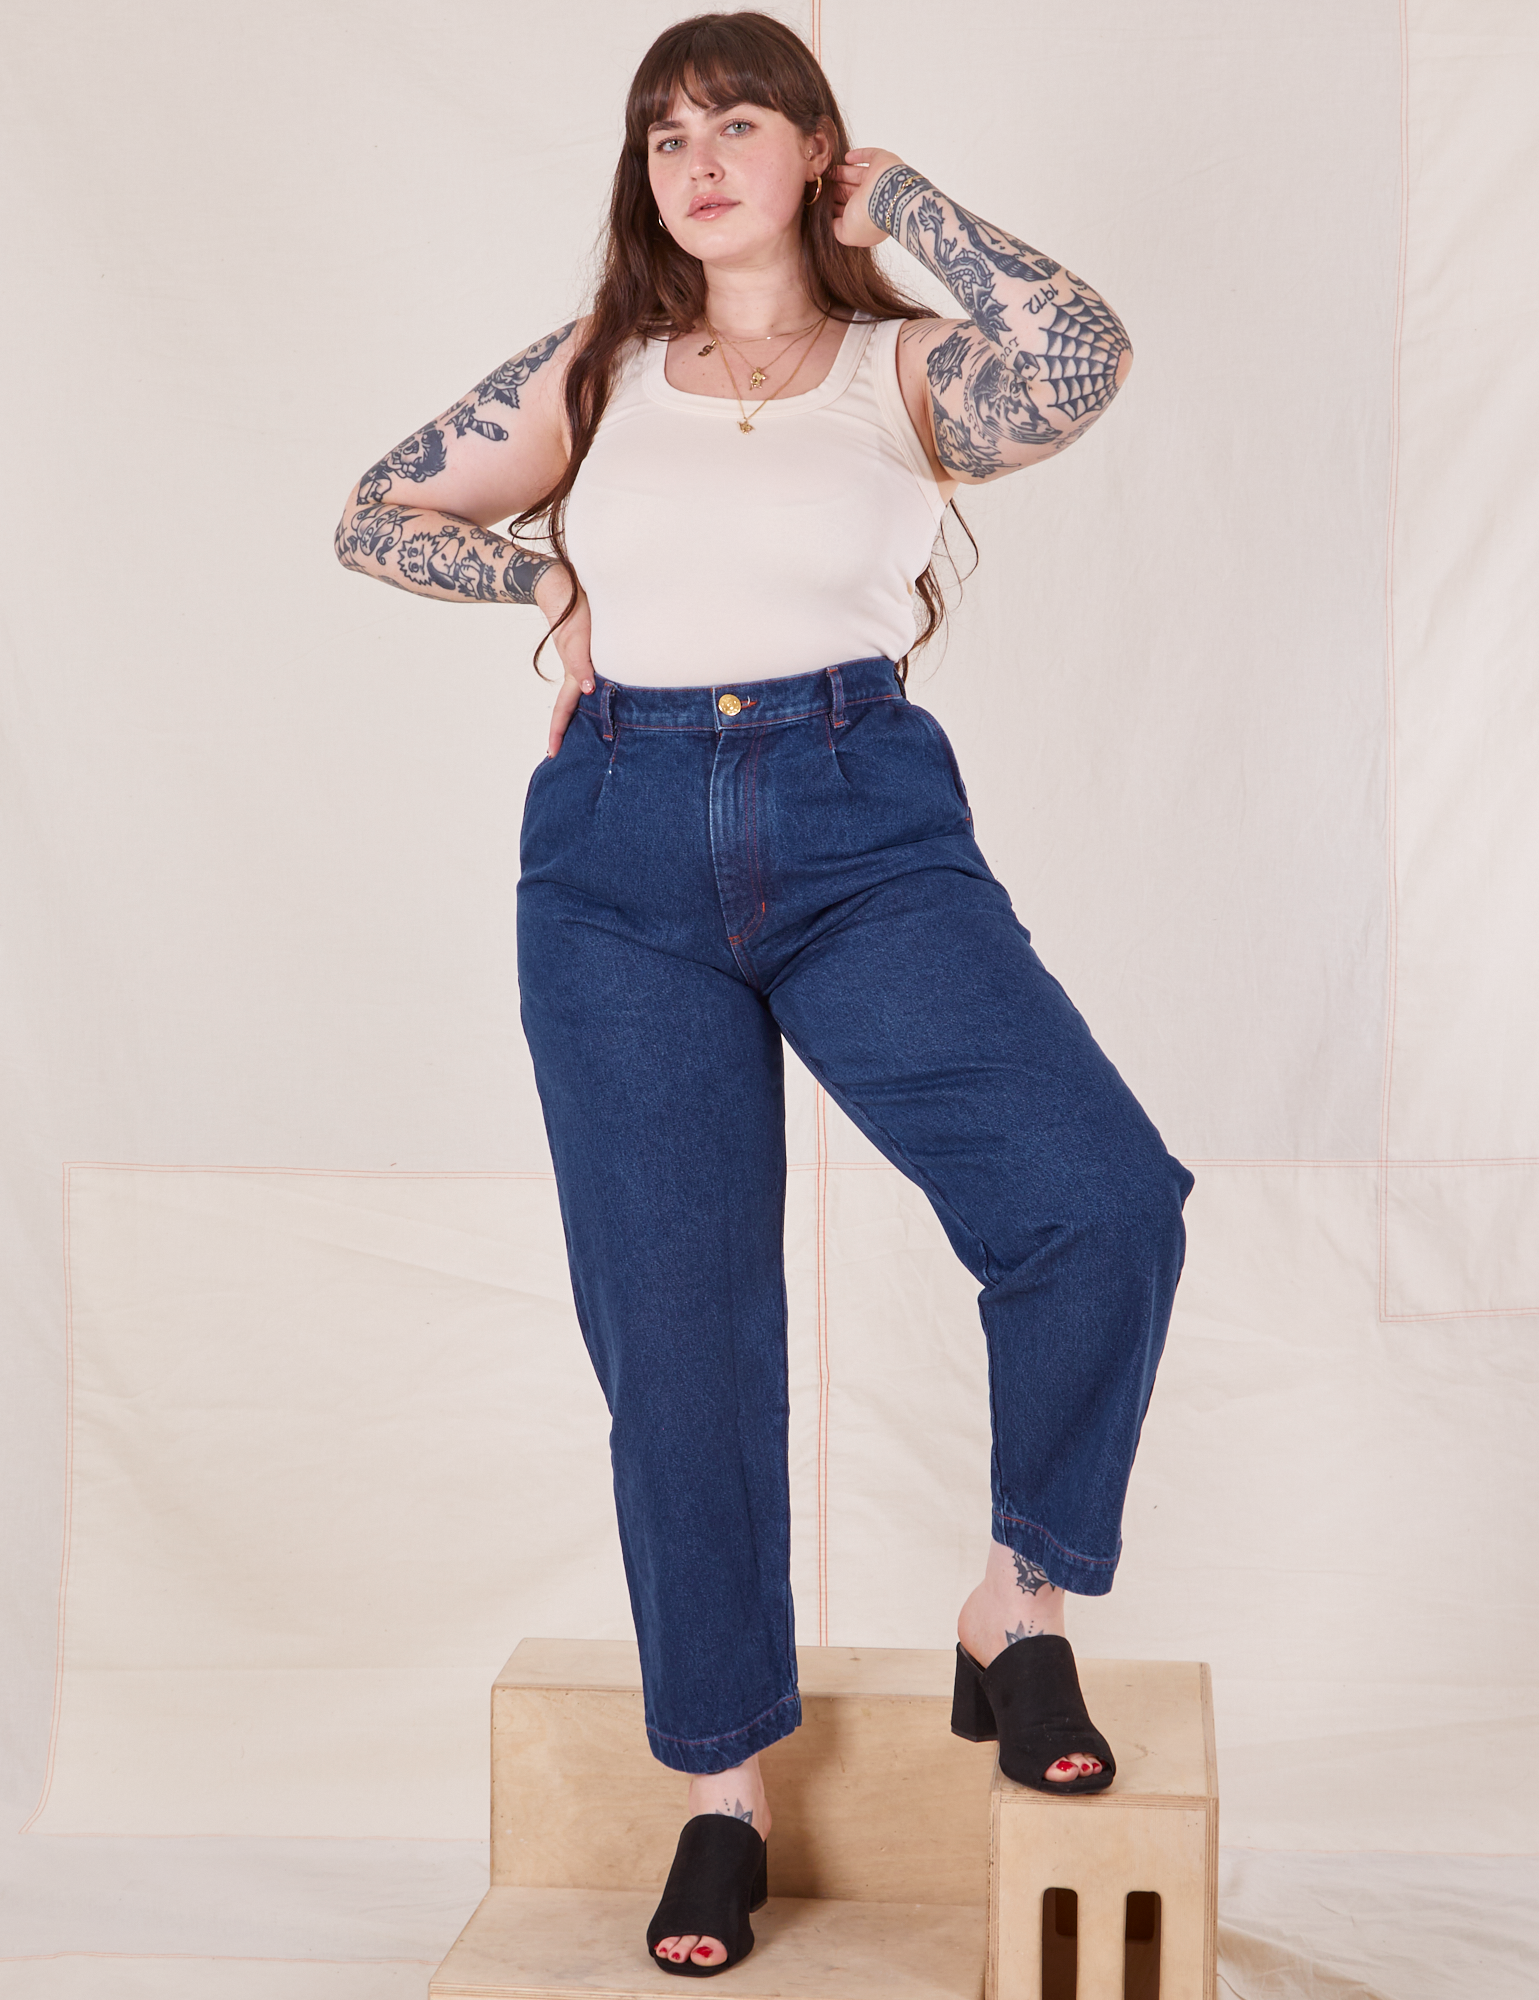 Sydney is 5'9" and wearing M Denim Trouser Jeans in Dark Wash paired with Tank Top in vintage Tee off-white